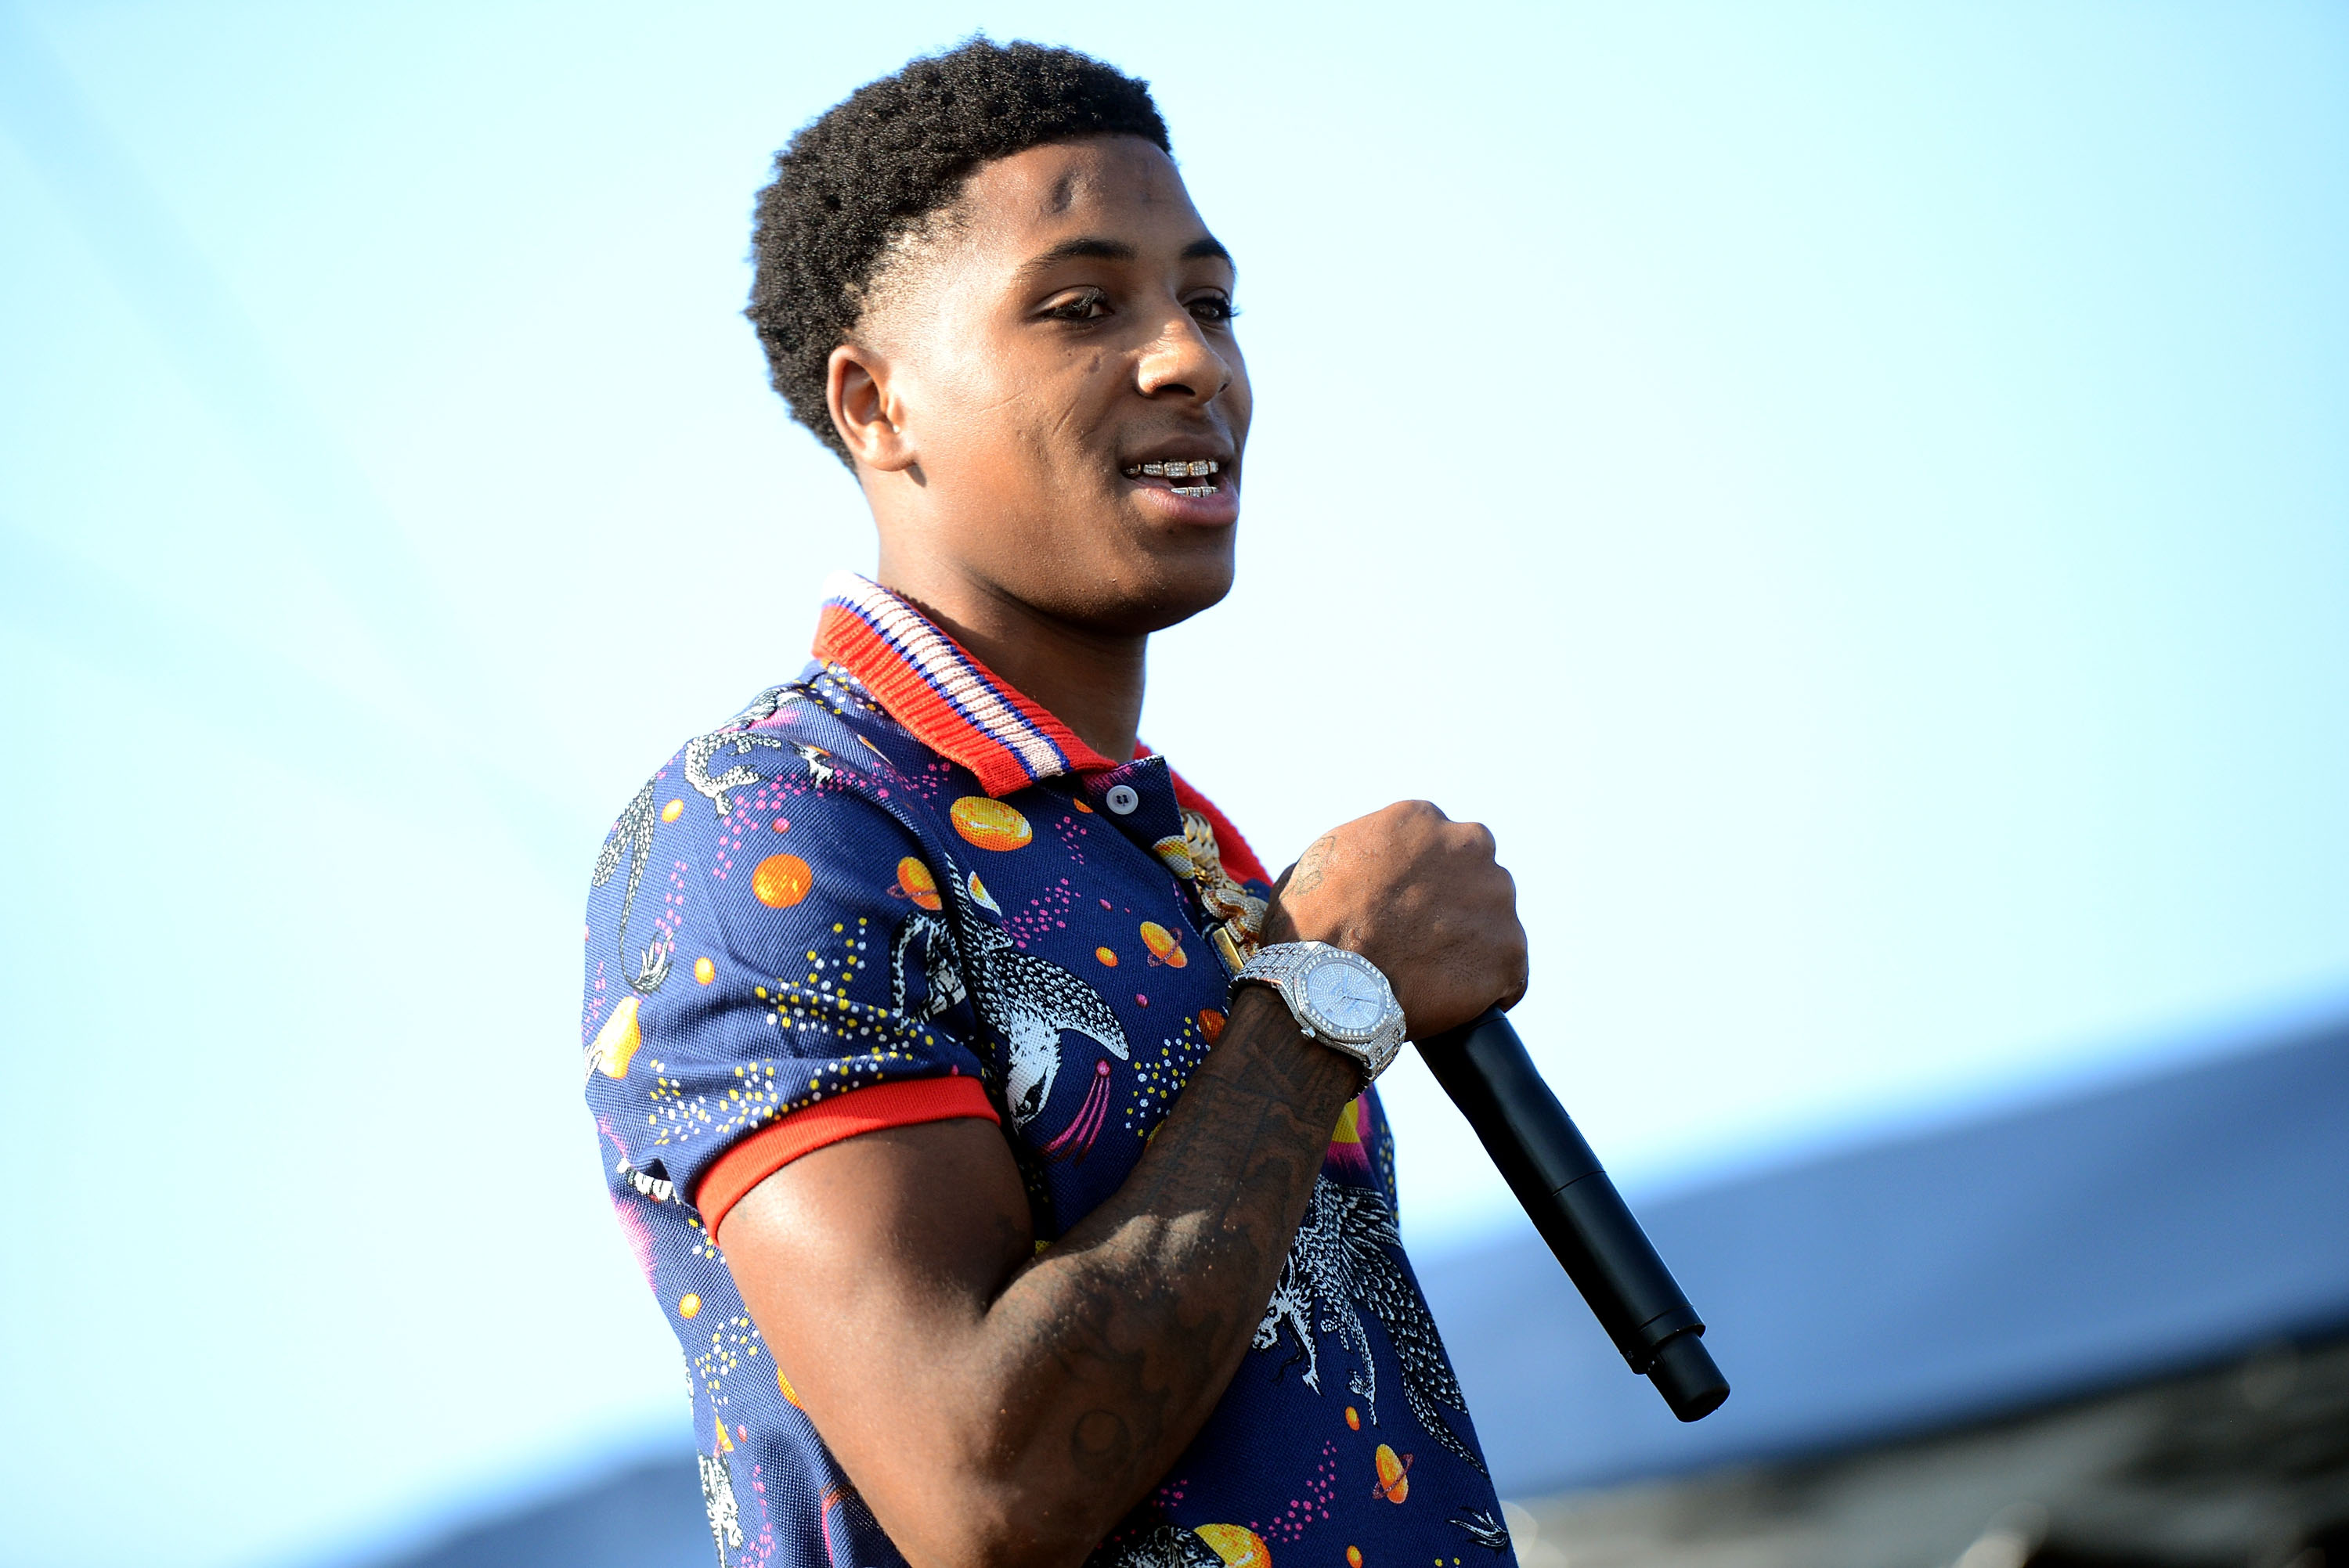 Youngboy Never Broke Again House Arrest Conditions Revealed: Report